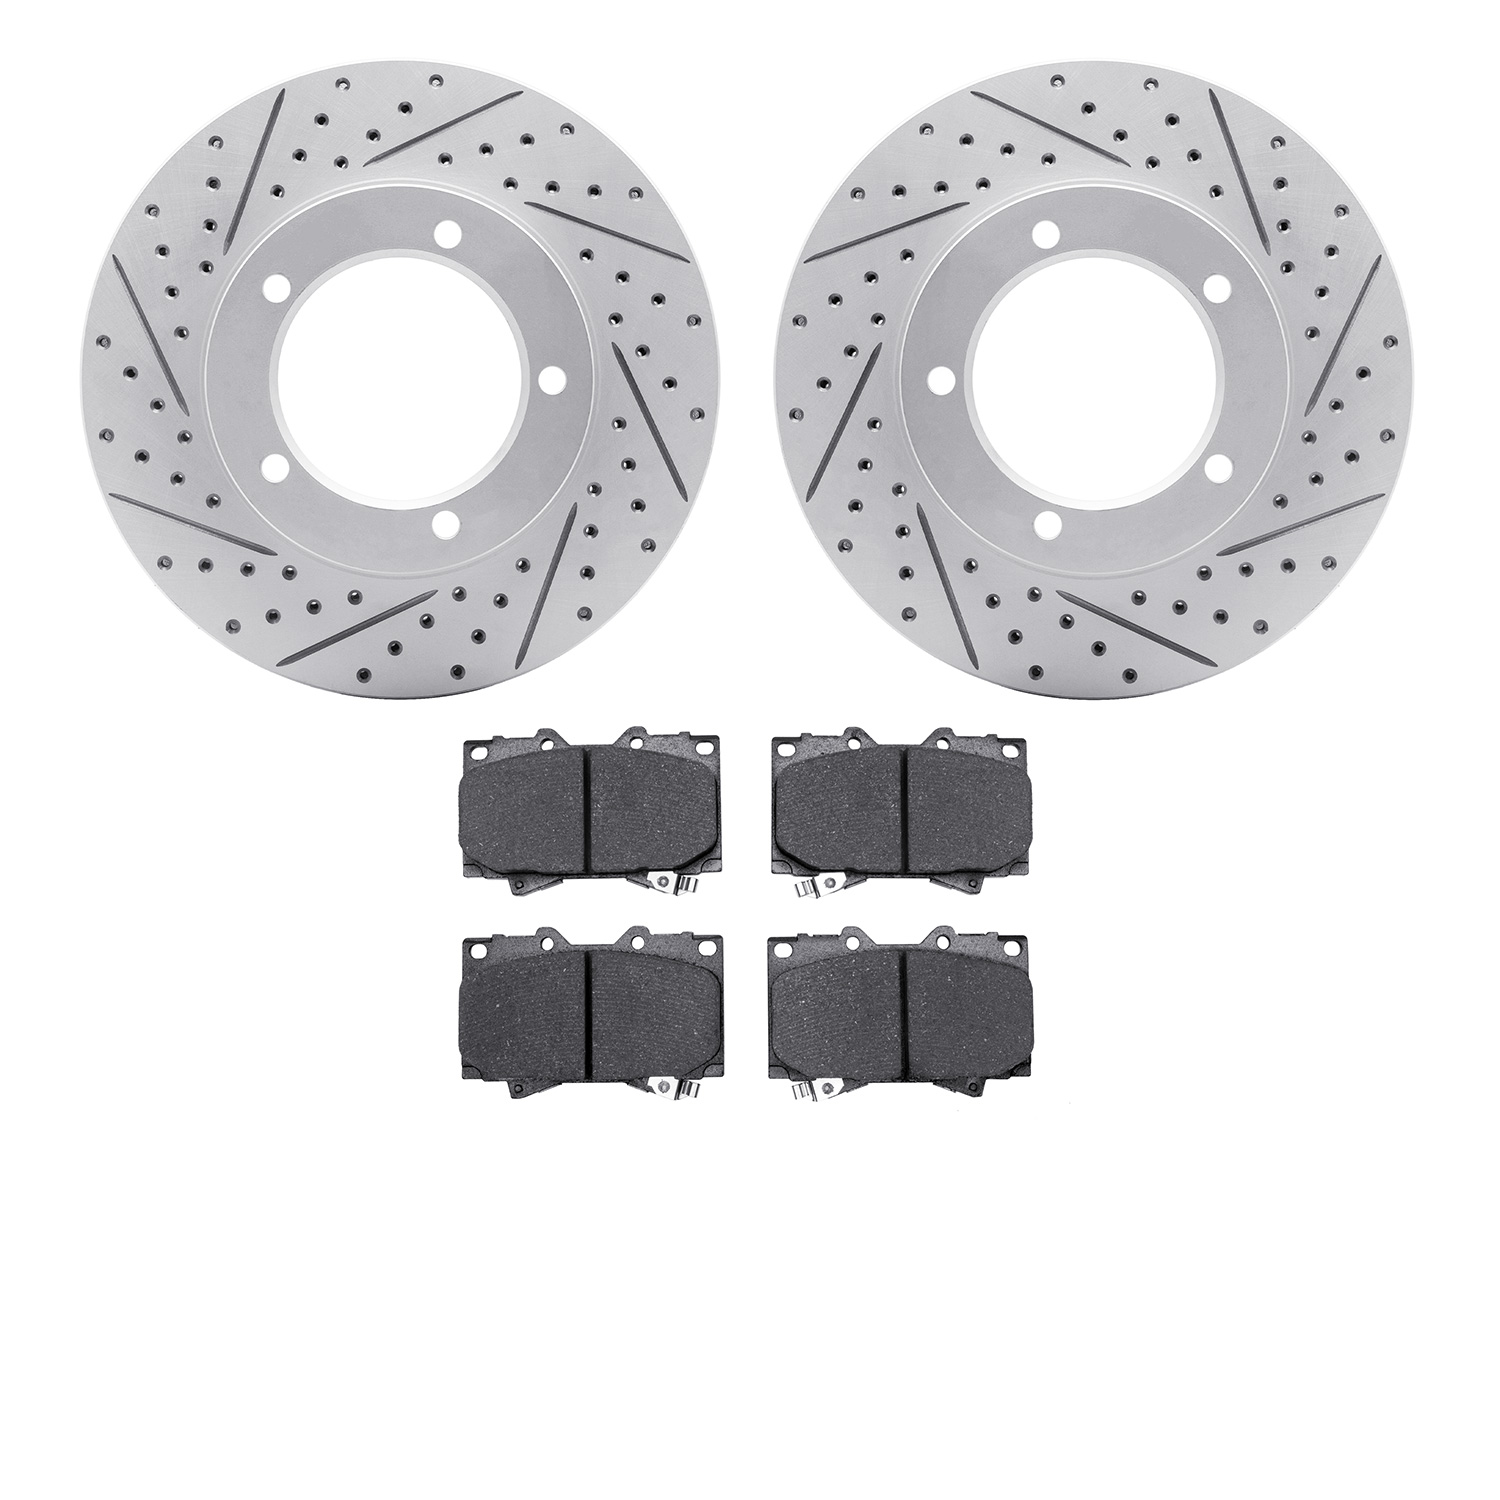 2502-76115 Geoperformance Drilled/Slotted Rotors w/5000 Advanced Brake Pads Kit, 1998-2007 Lexus/Toyota/Scion, Position: Front